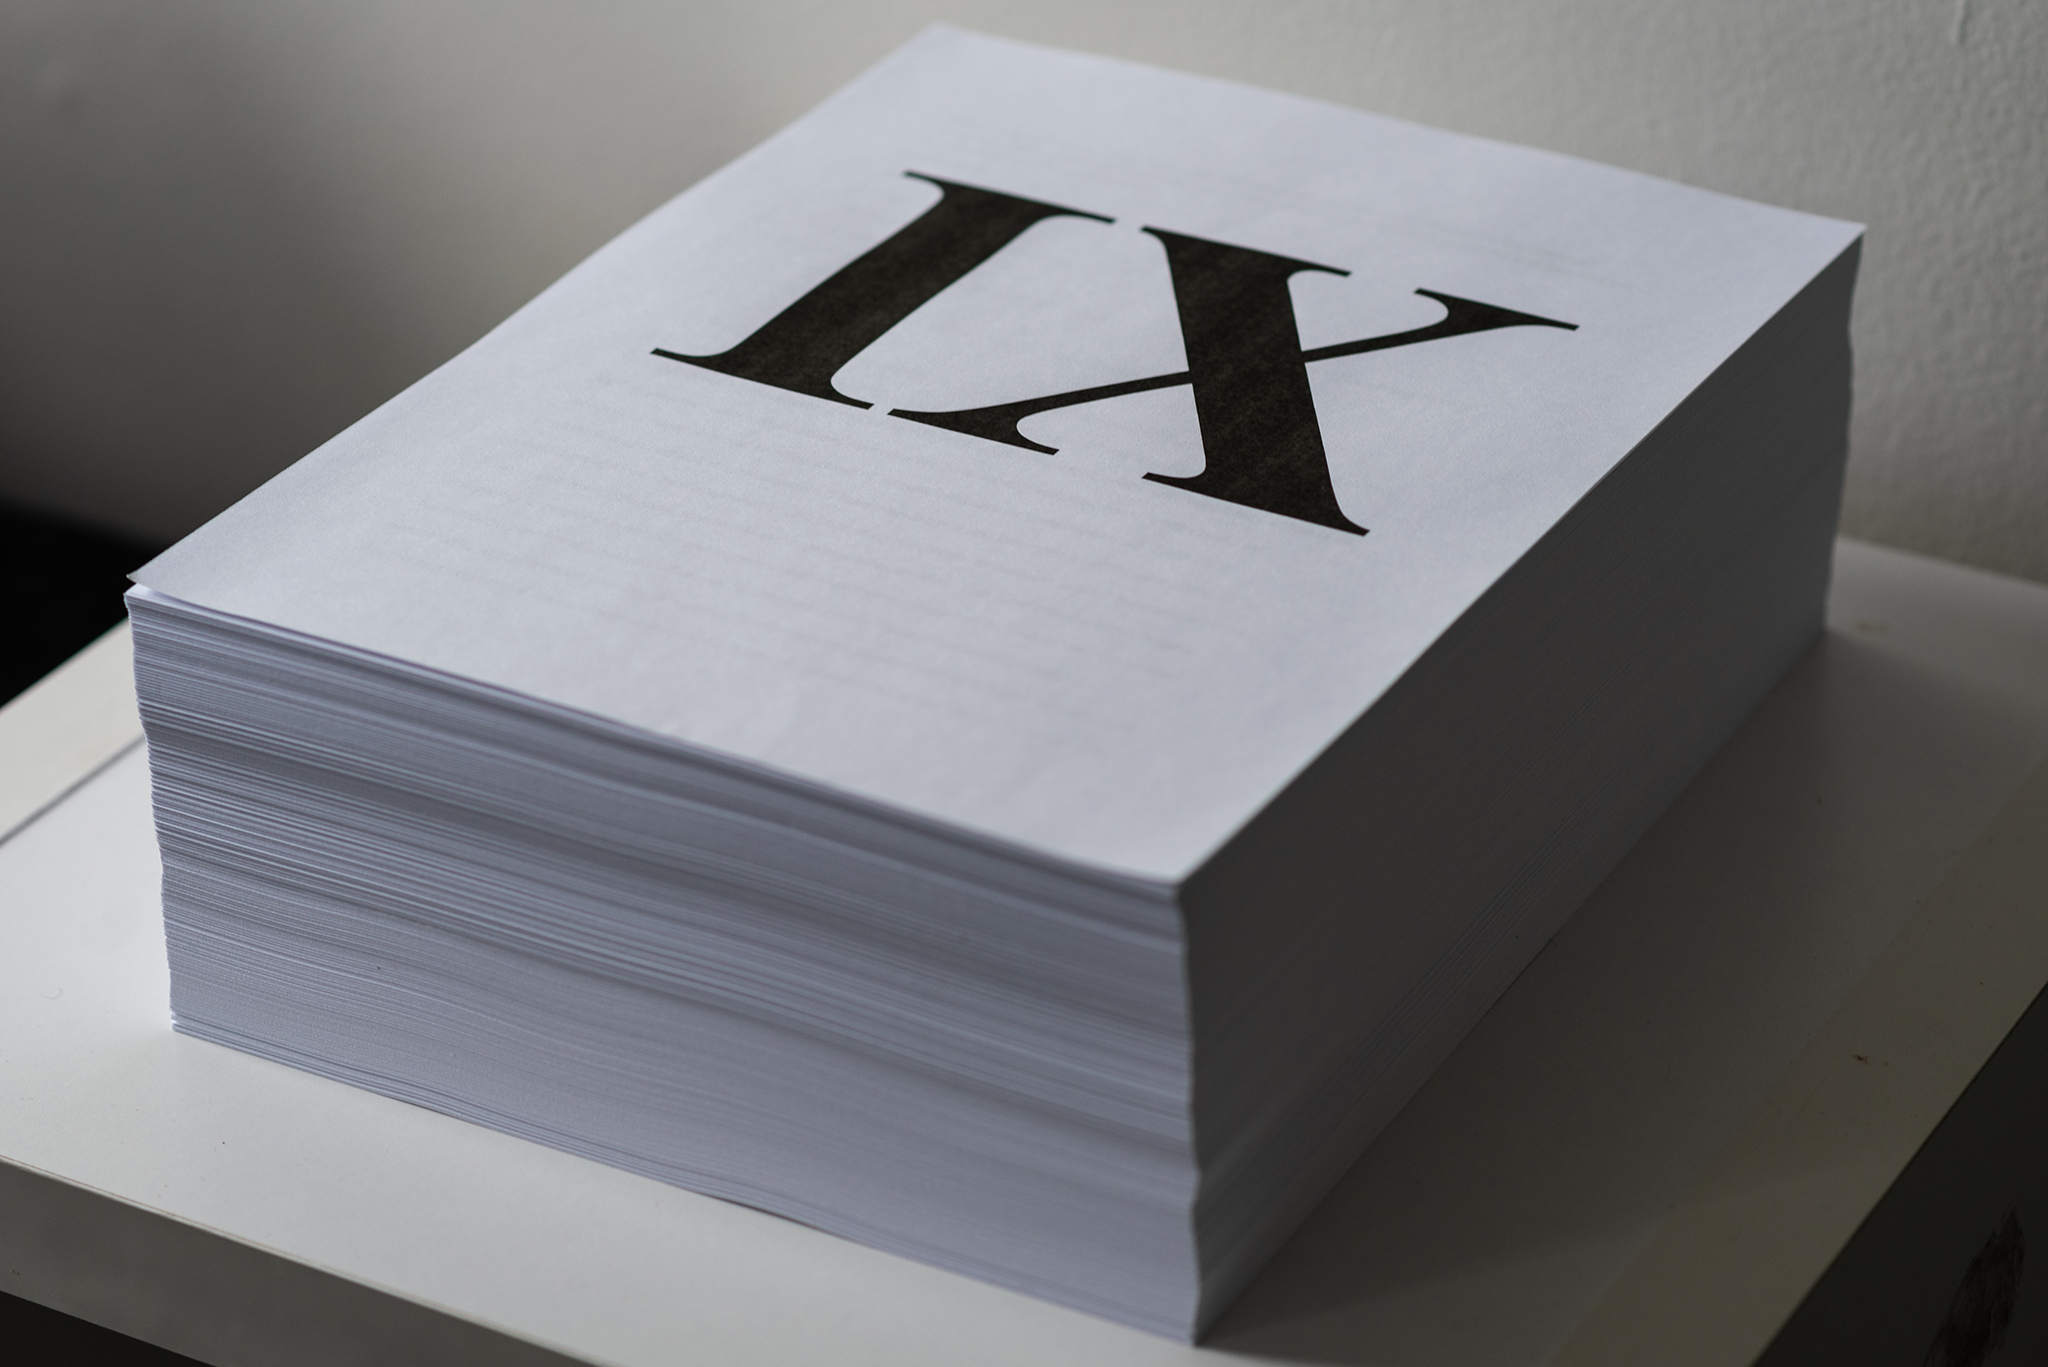 Photographic image of a large stack of paper approximately 1000 sheets high, the top sheet has a large Roman numeral "IX" representing the Title IX documents.